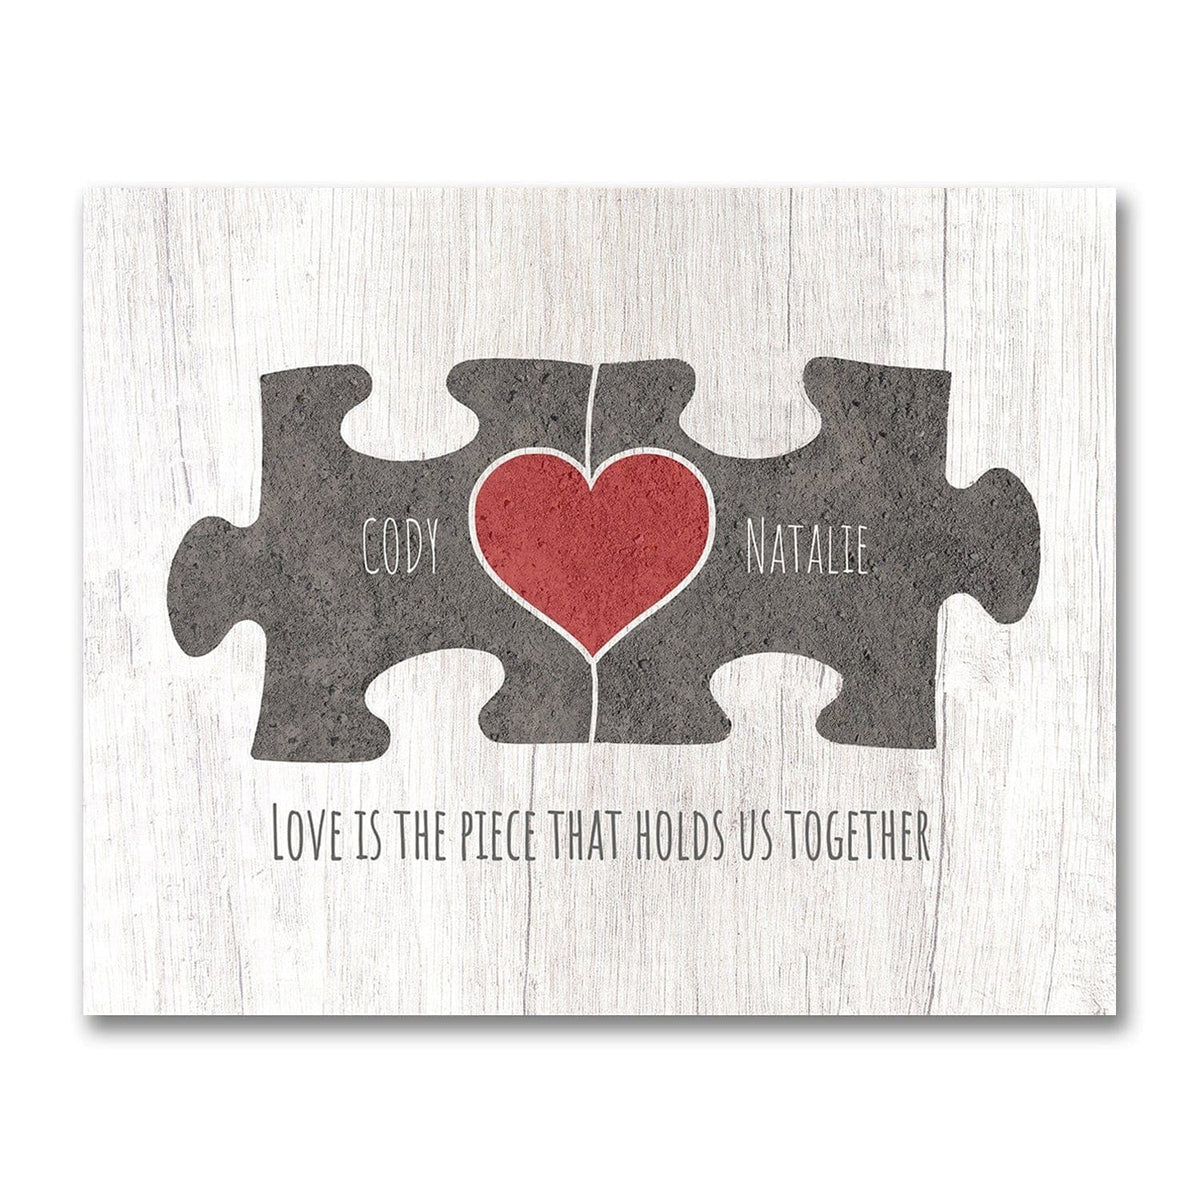 Love is the piece that holds us together - personalized gift